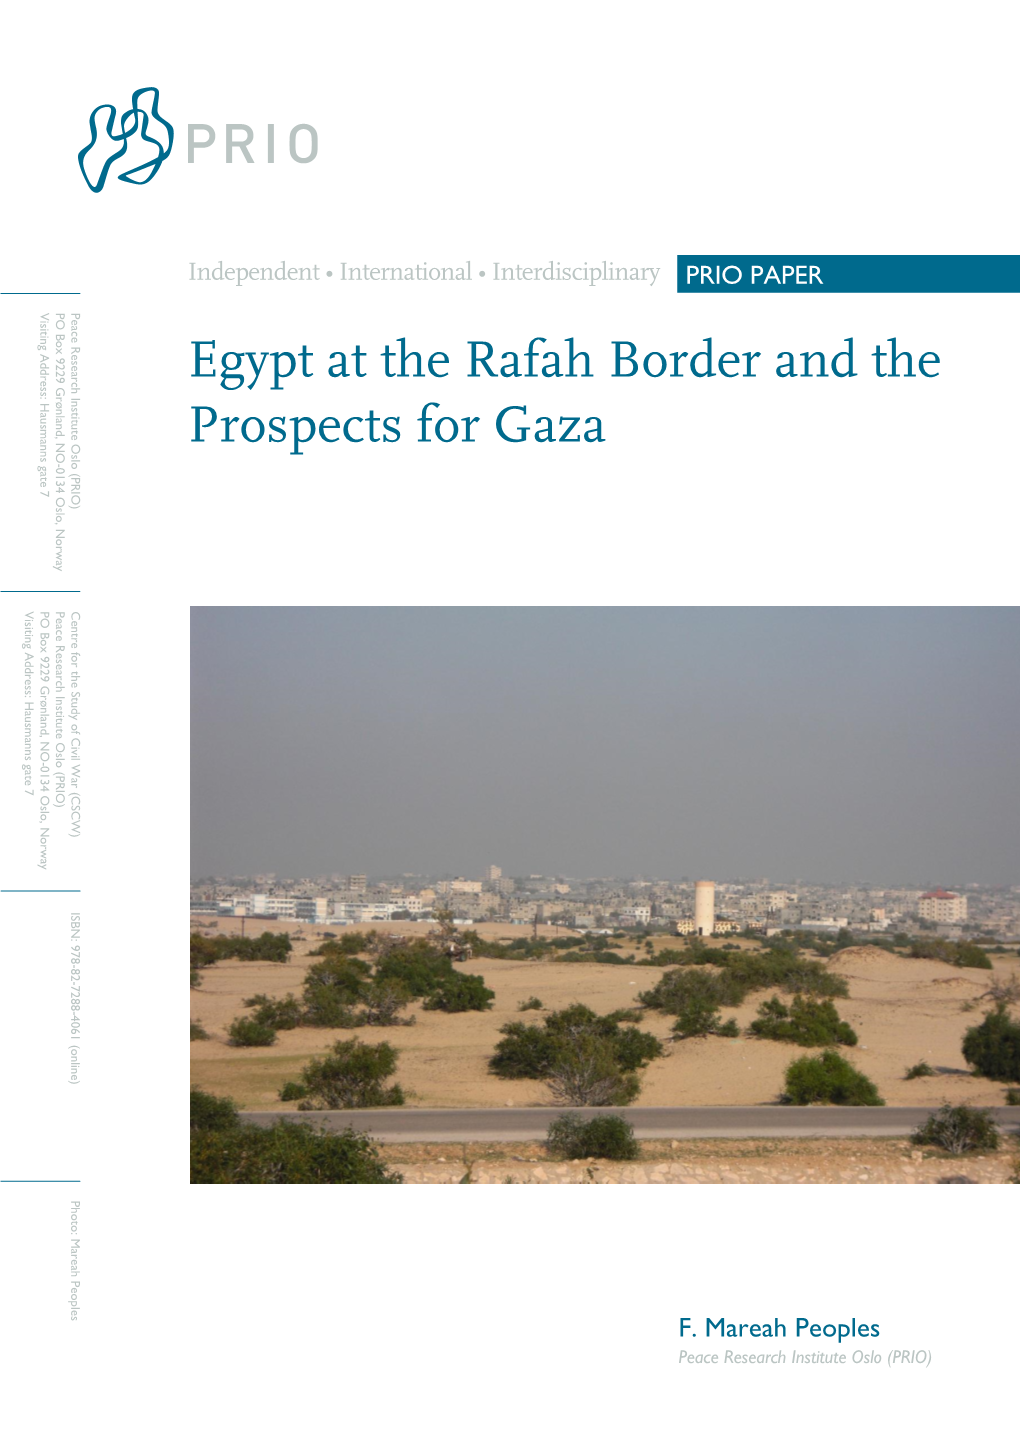 Egypt at the Rafah Border and the Prospects for Gaza